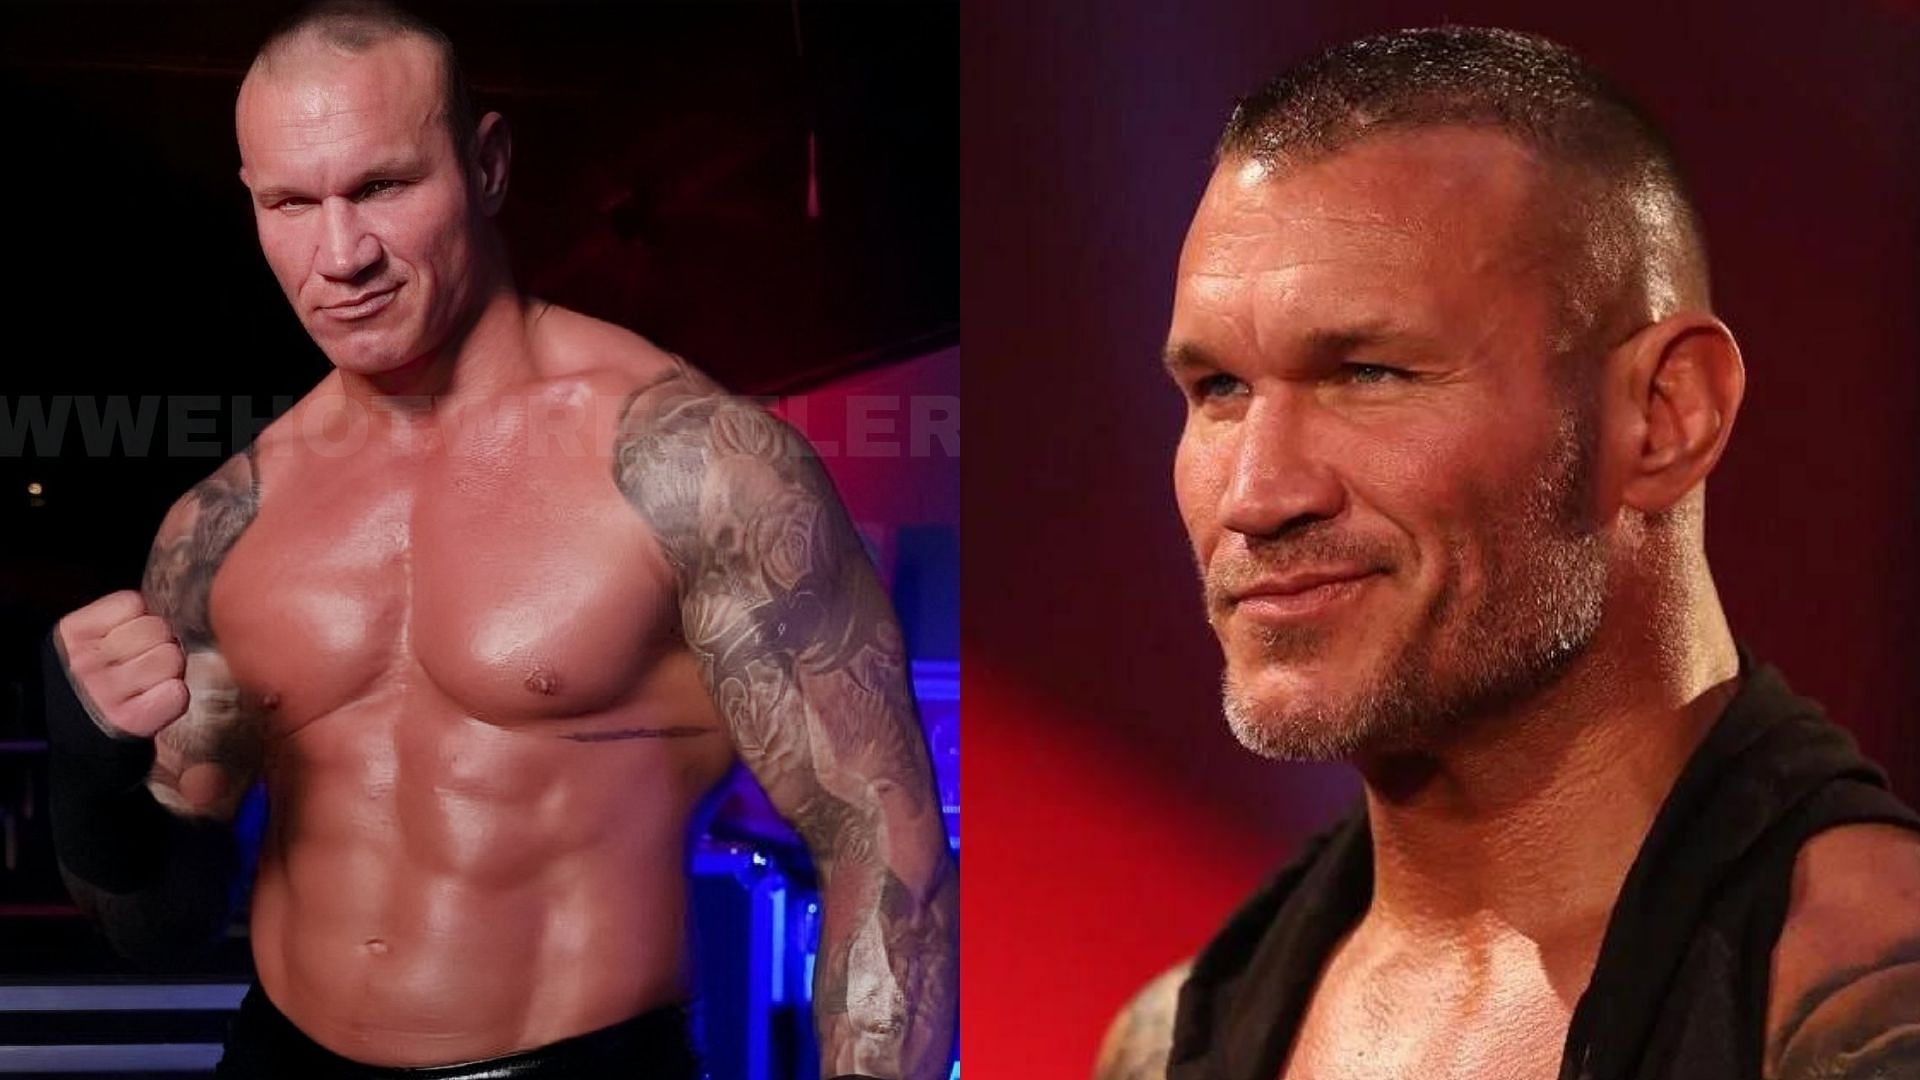 Orton will be appearing tonight on SmackDown.